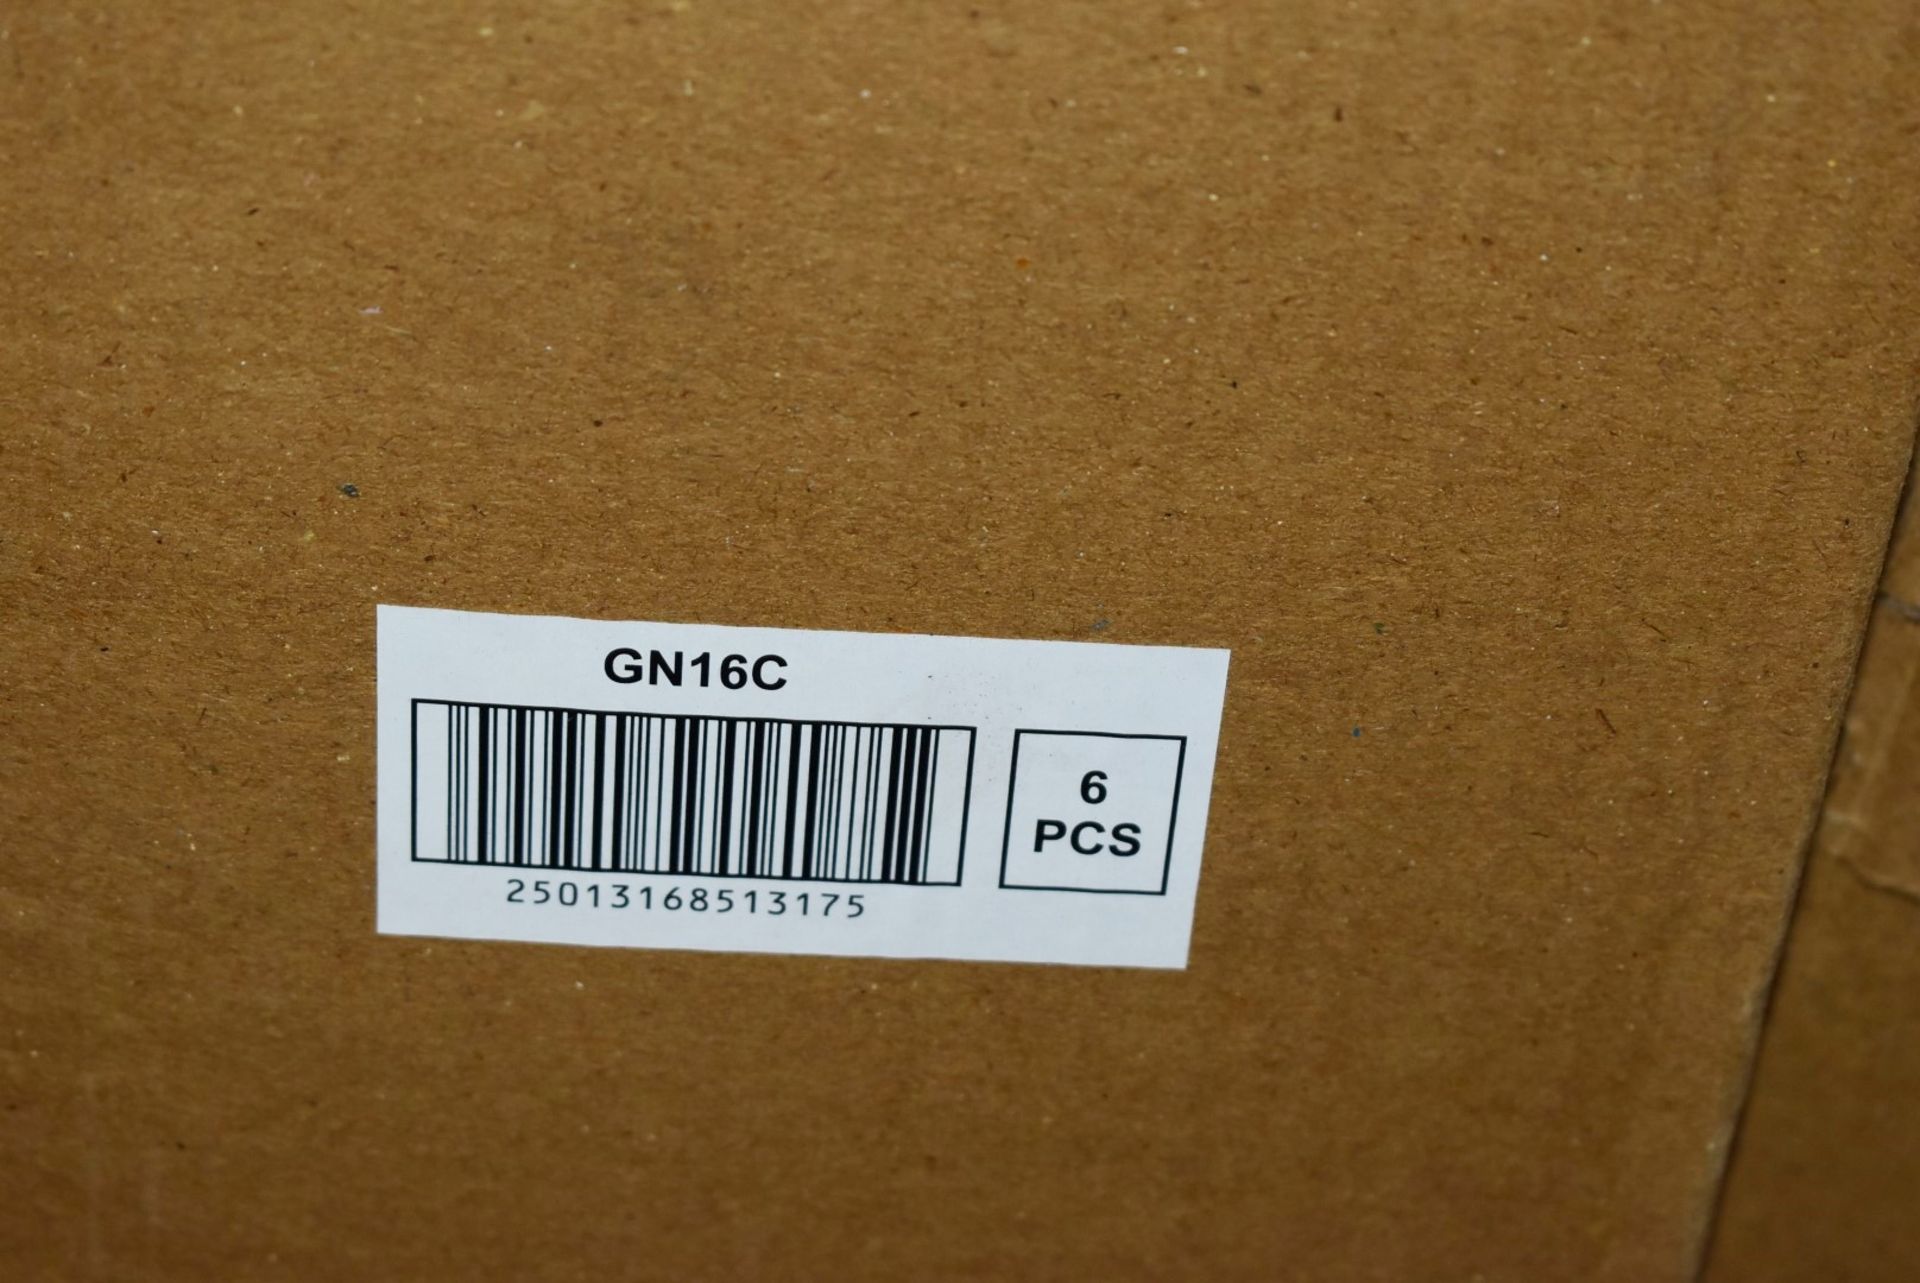 43 x Stainless Steel Gastro Pans - New in Boxes - 1/6 GN PAN, 150mm, 0.7mm - CL011 - Ref: GCA - Image 2 of 8